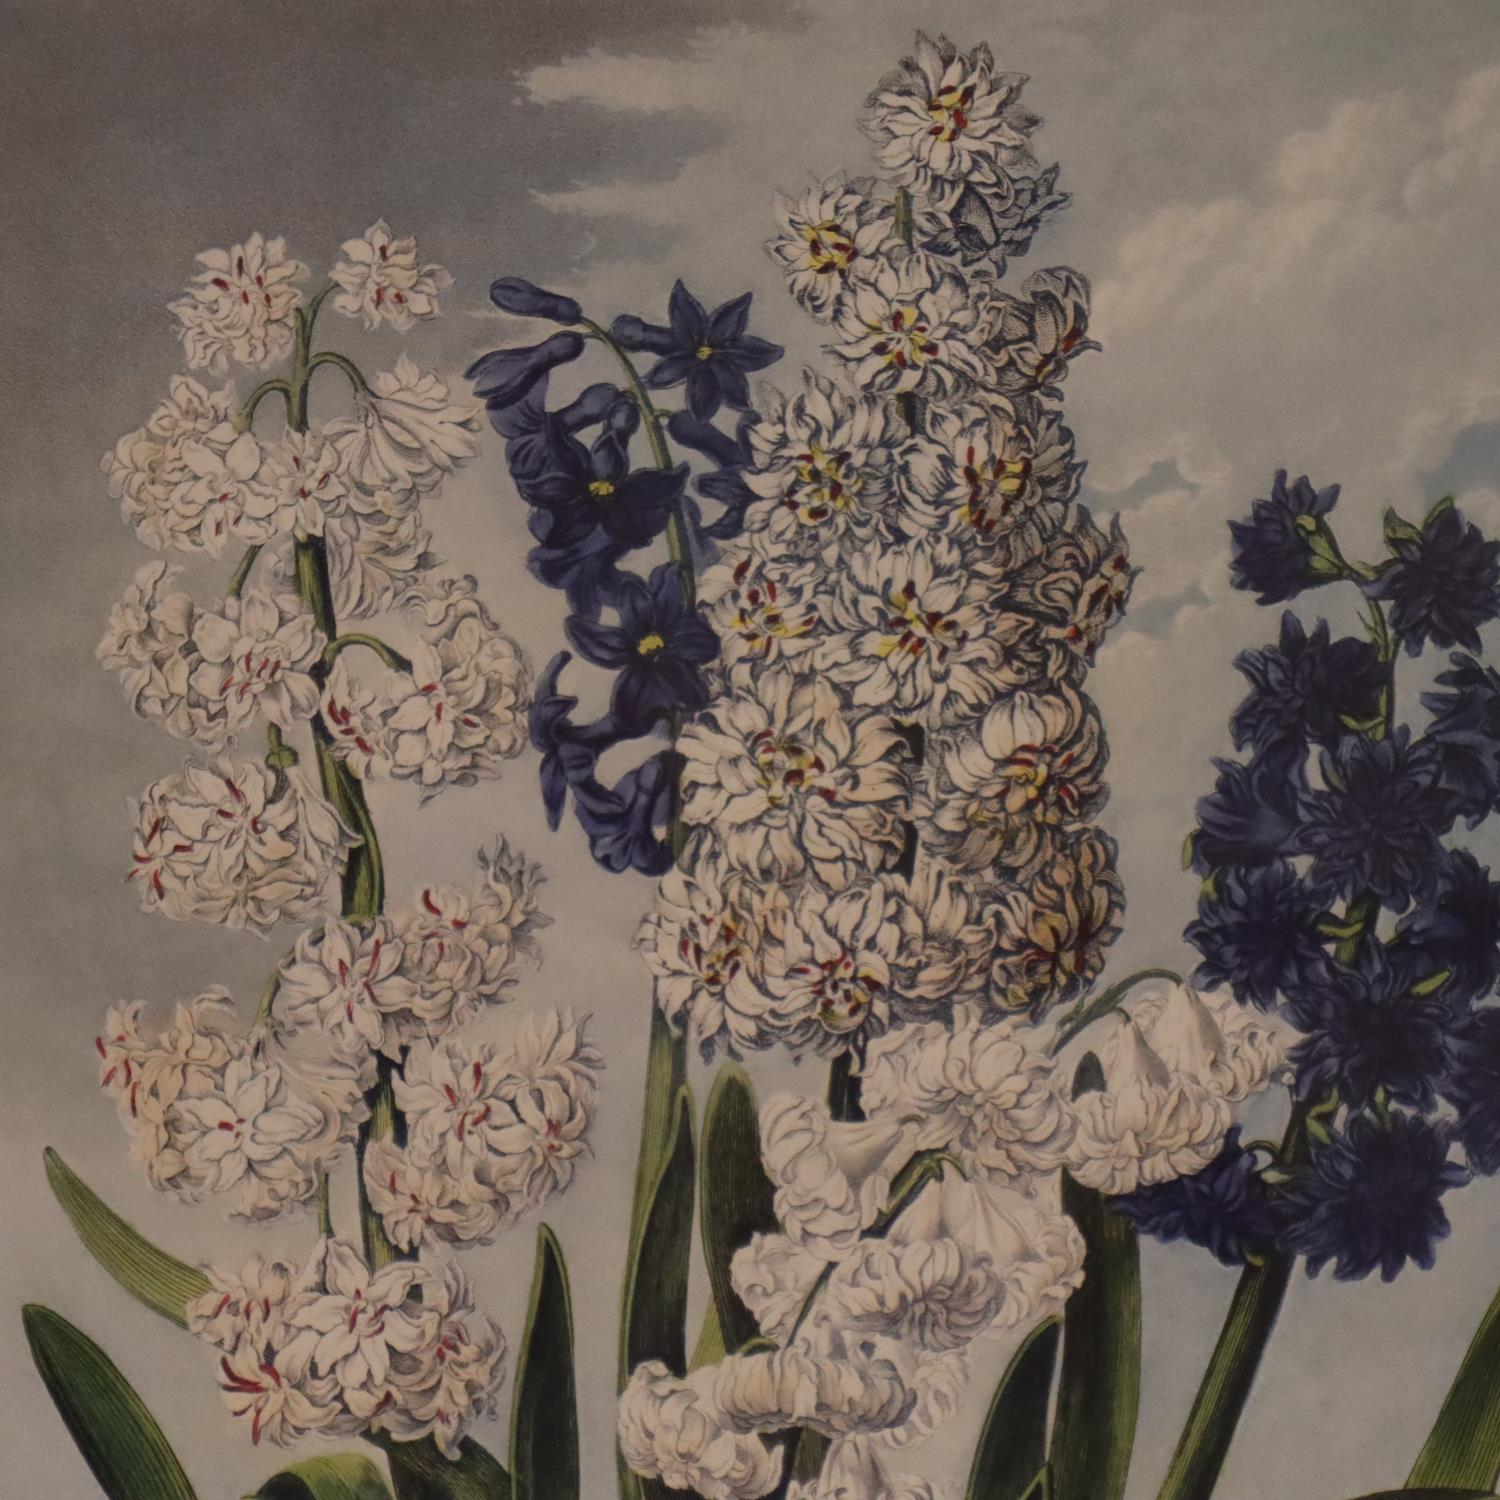 Robert John Thornton; eight floral prints, first published 1805, 39 x 51 cm. Not available for in- - Image 6 of 9